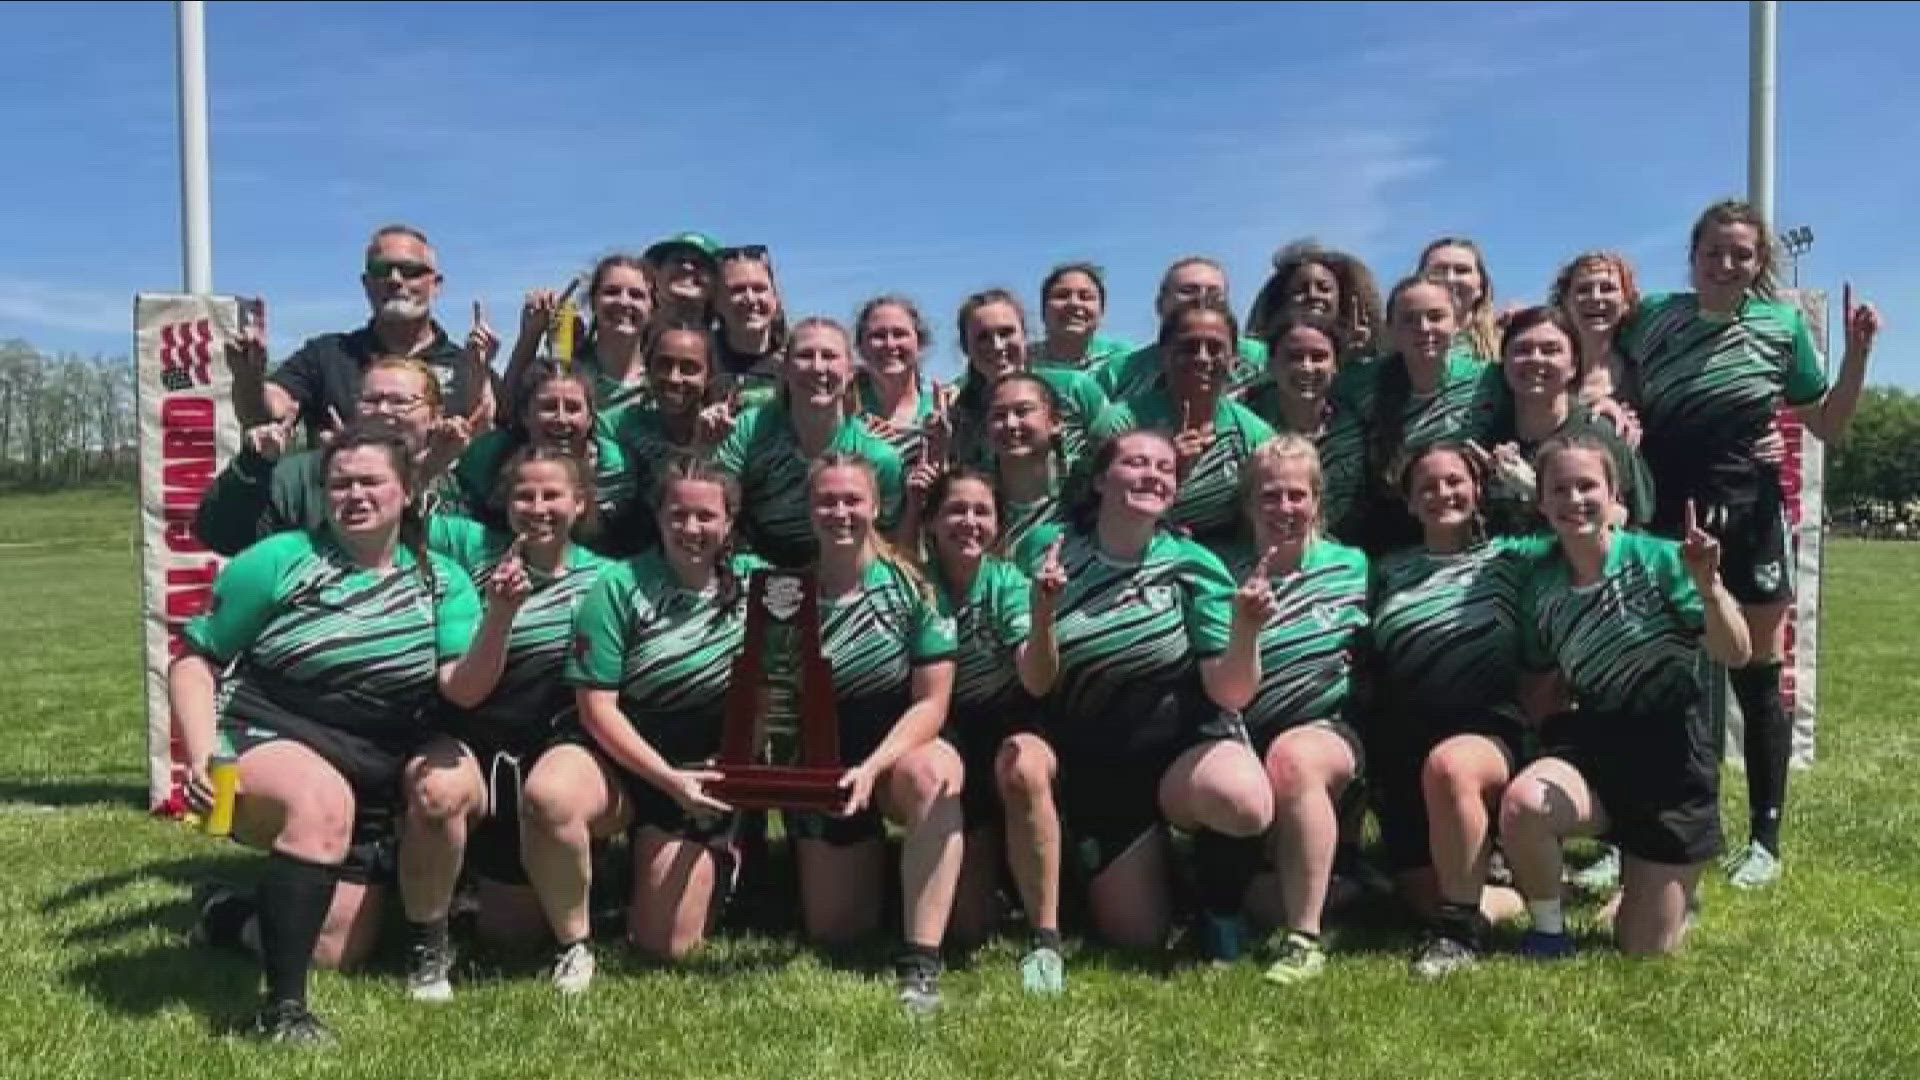 The all-women South Buffalo Rugby team will compete for a USA Club Rugby national title in two weeks in Texas.